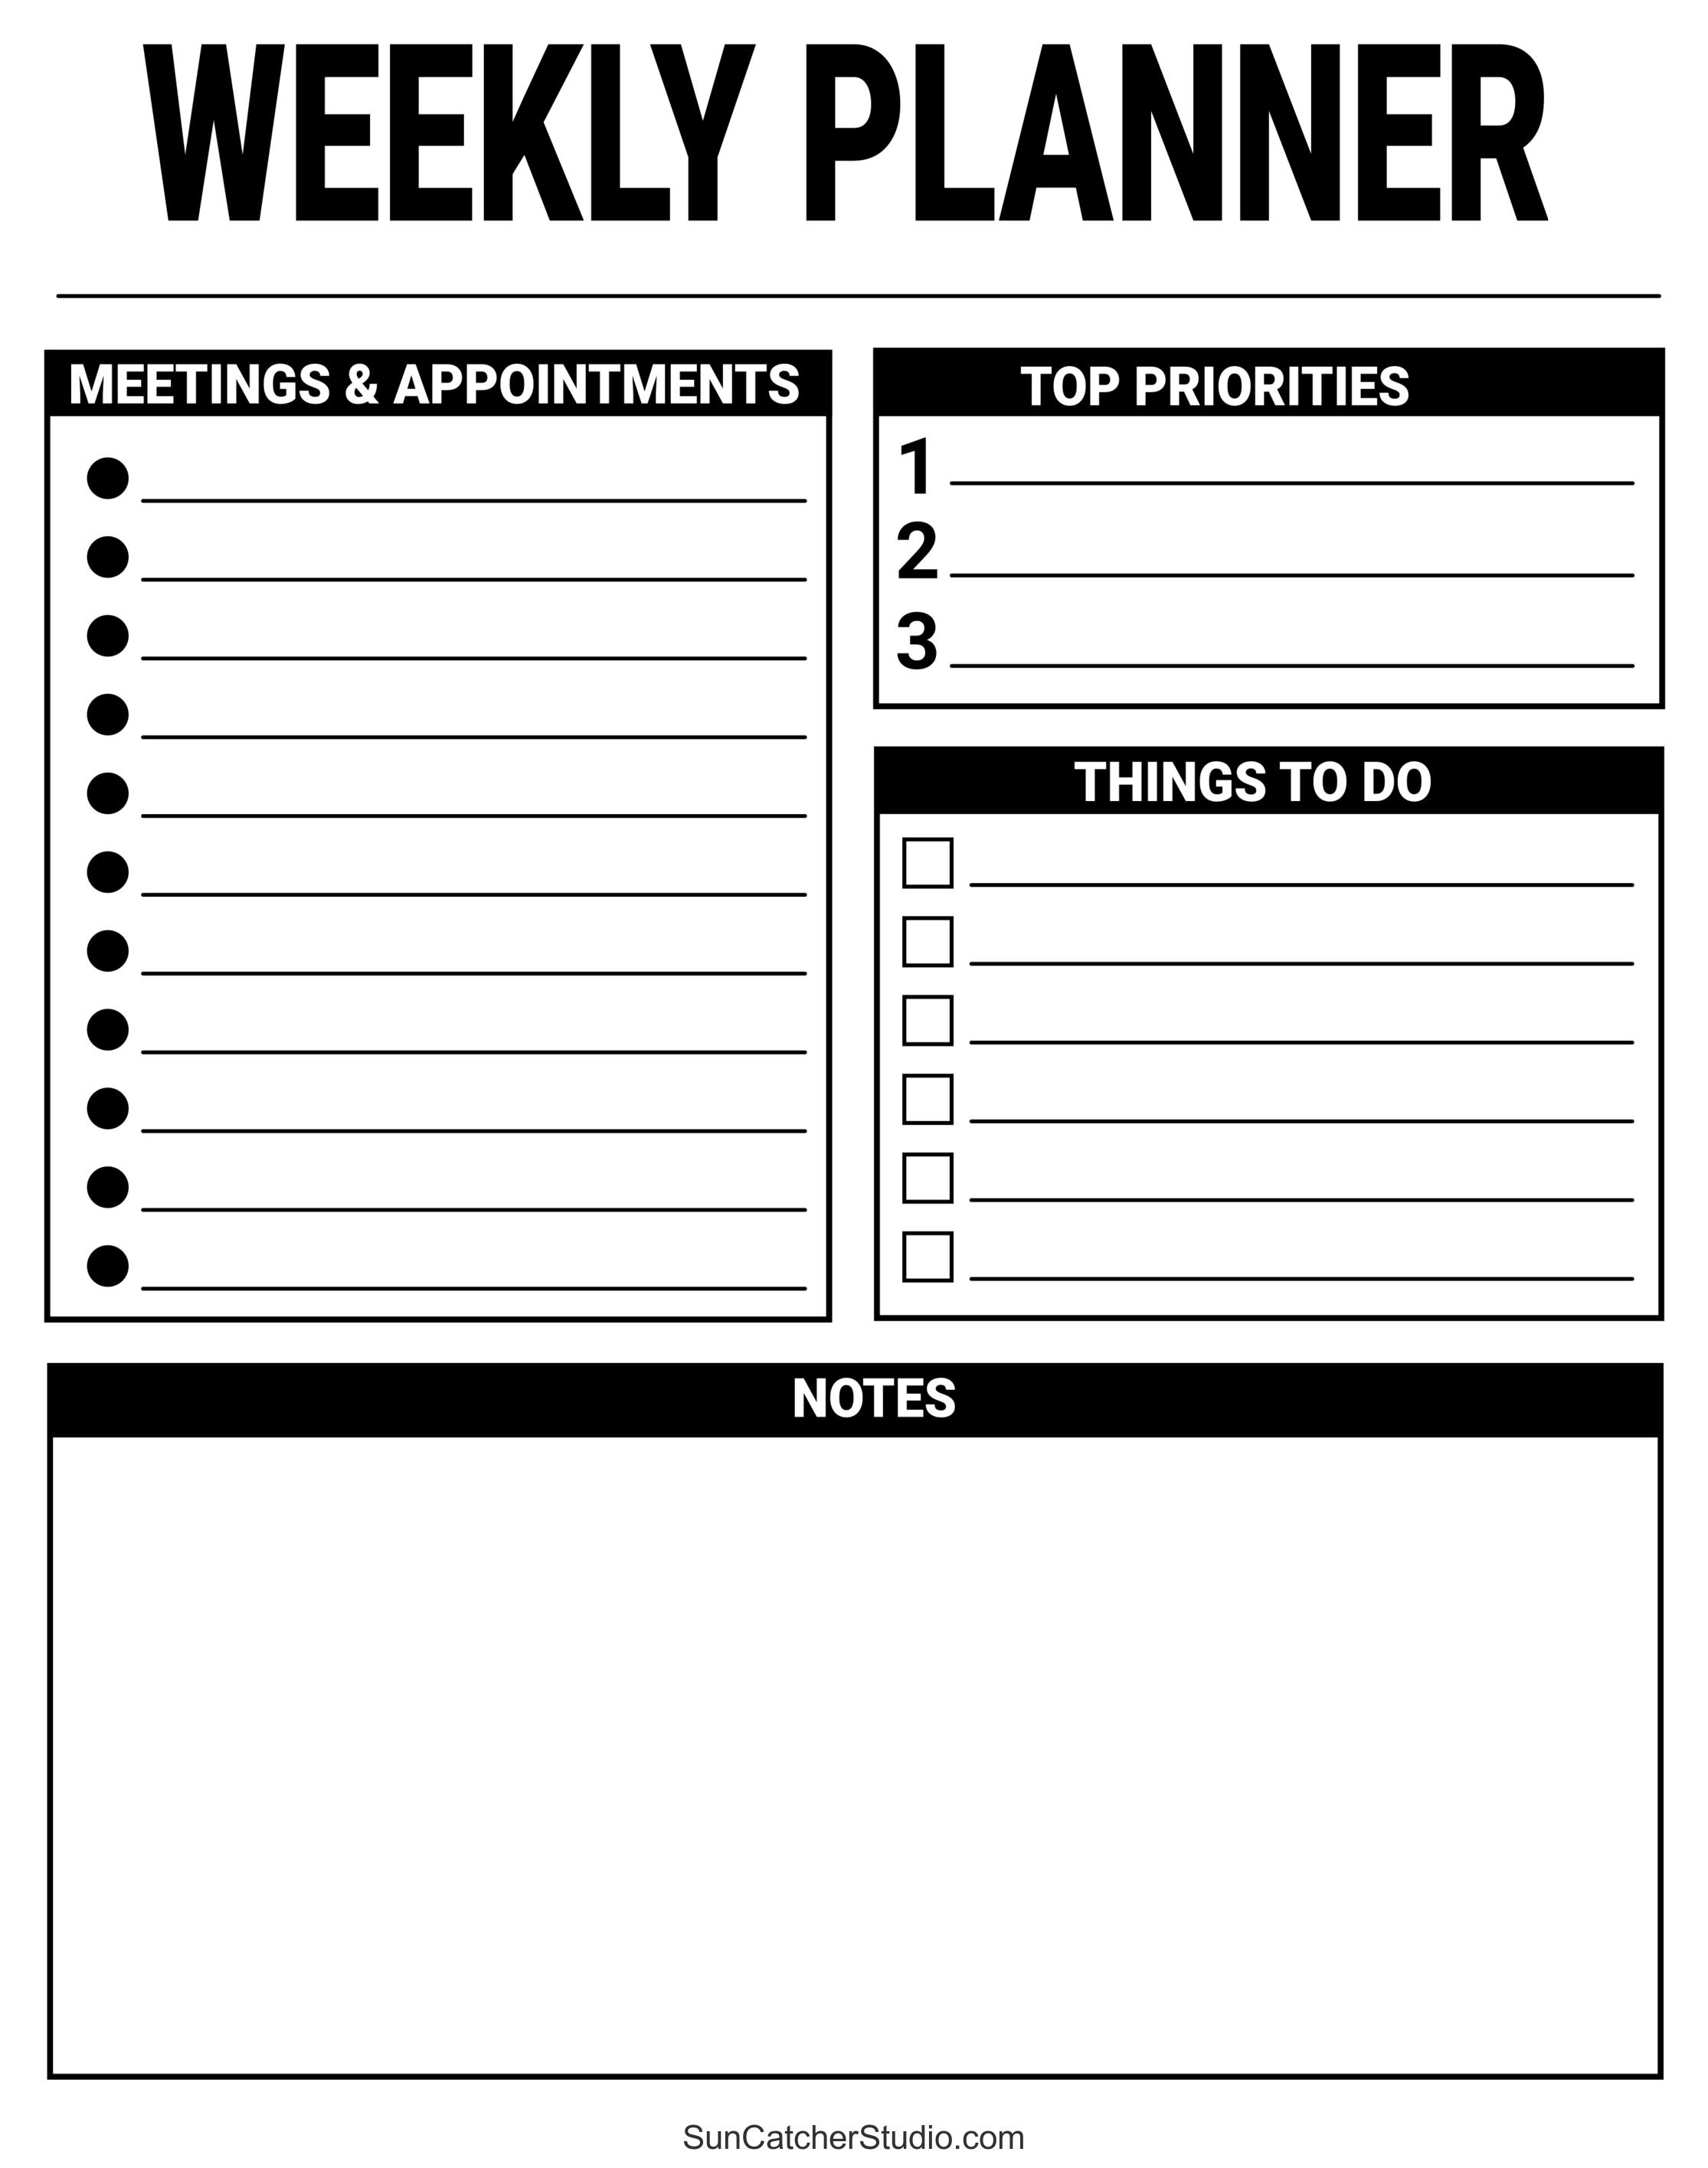 free-printable-weekly-planner-templates-pdf-diy-projects-patterns-monograms-designs